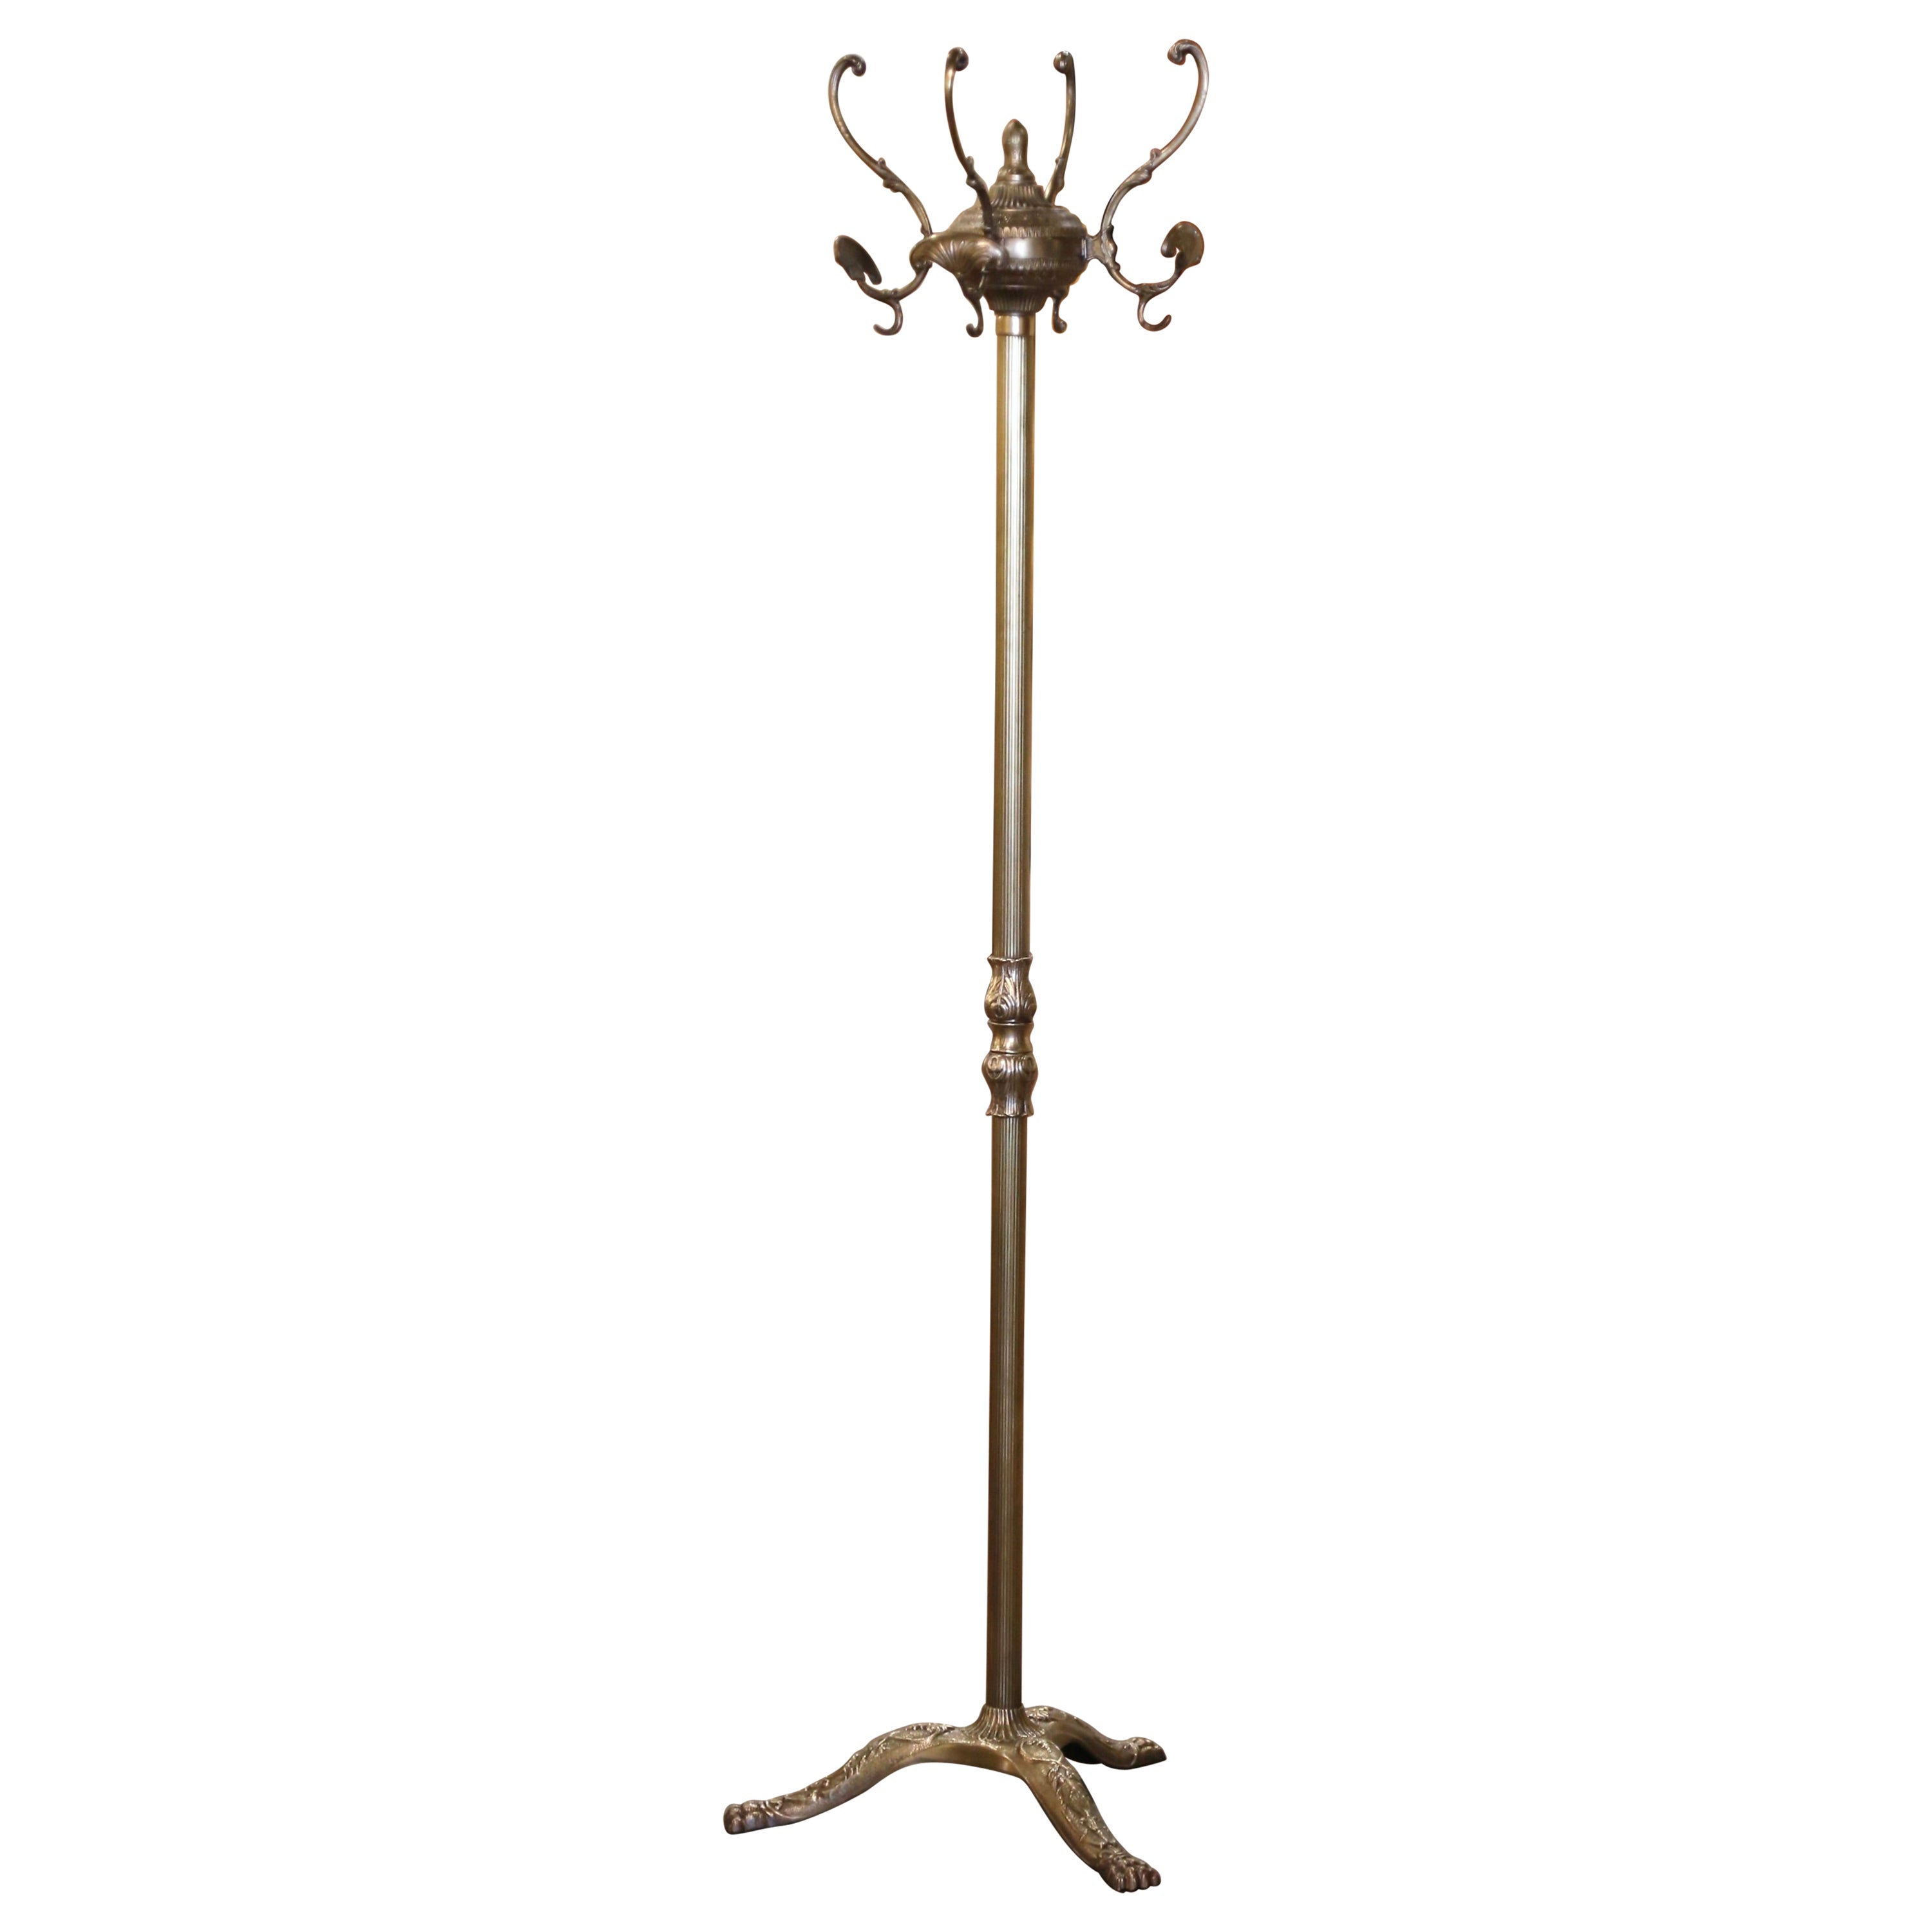 Early 20th Century French Gilt Brass Swivel Four-Hook Standing Hall Tree For Sale